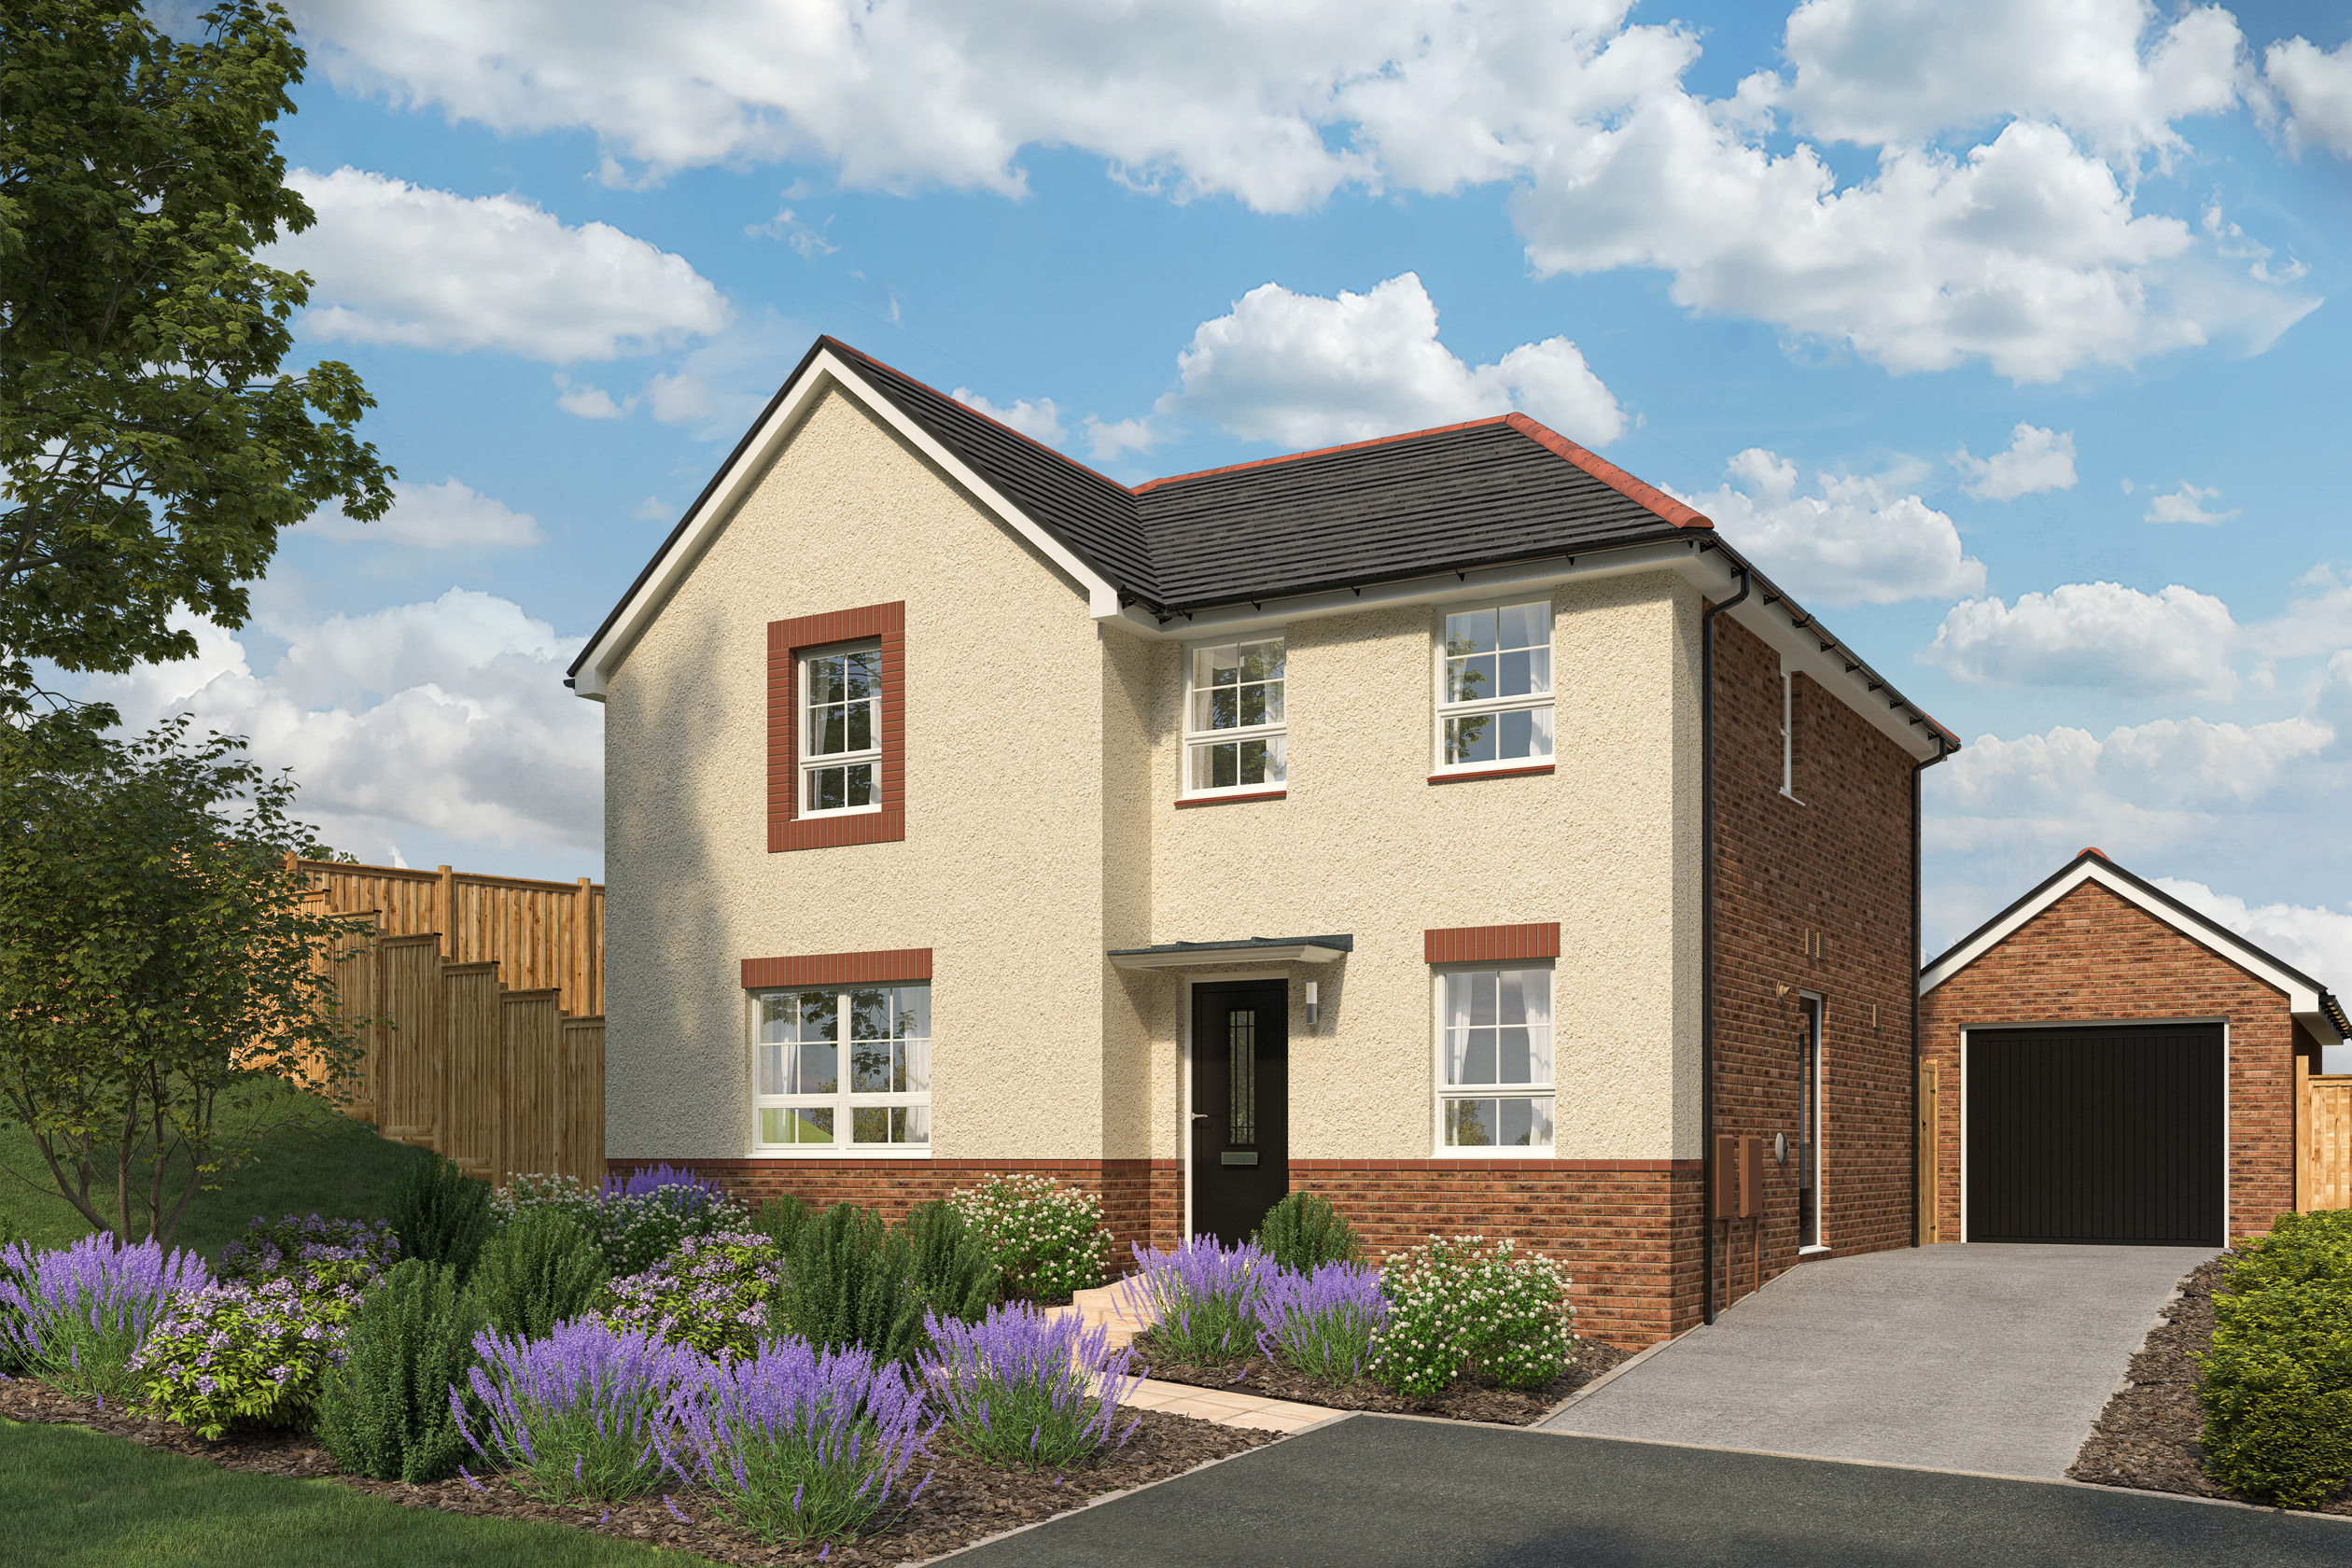 Property 1 of 10. Illustrative Image Of The Radleigh At Okement Park